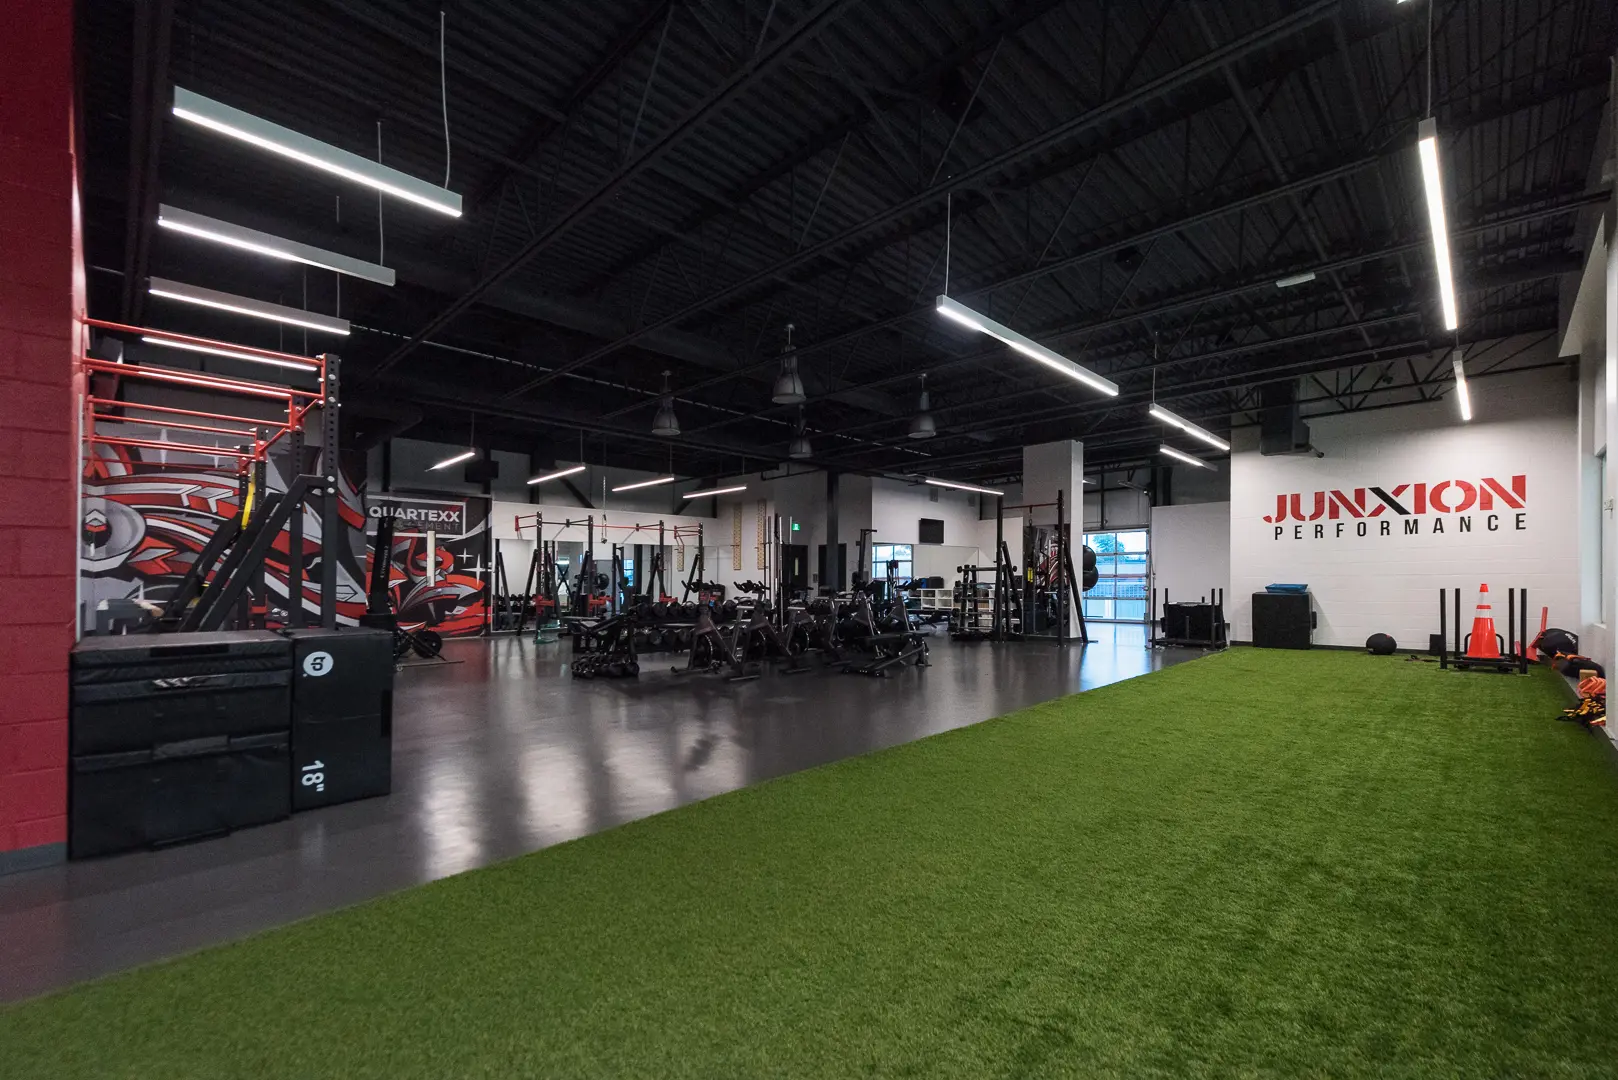 The upstairs gym at JUNXION Performance with a turf area and various gym equipment in the background.